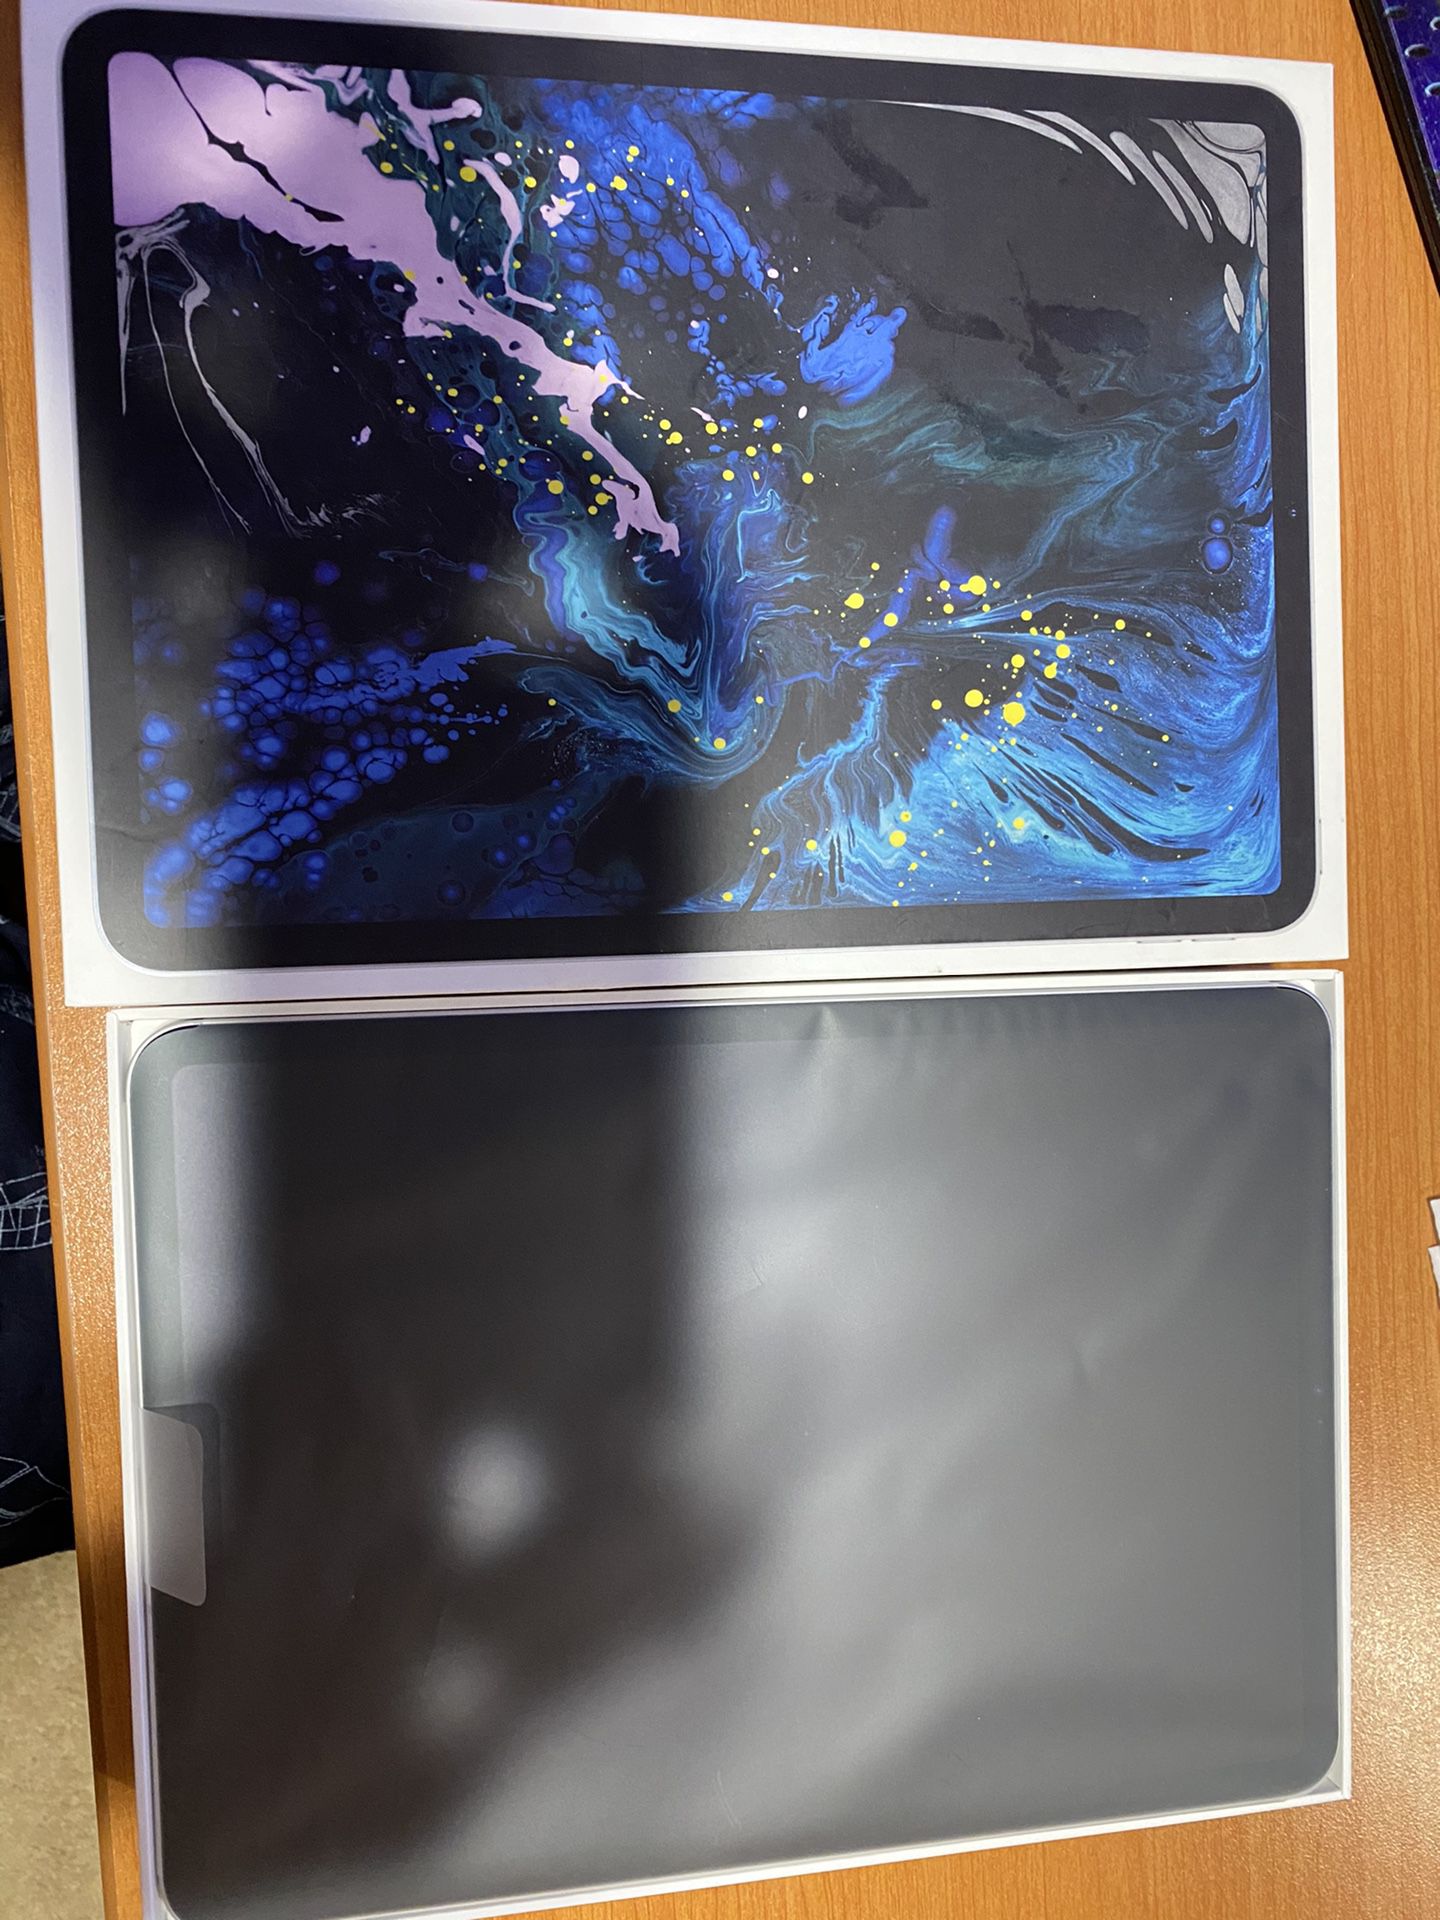 apple ipad pro 11 inch silver 256gb wifi and cellular unlocked Brand new never used